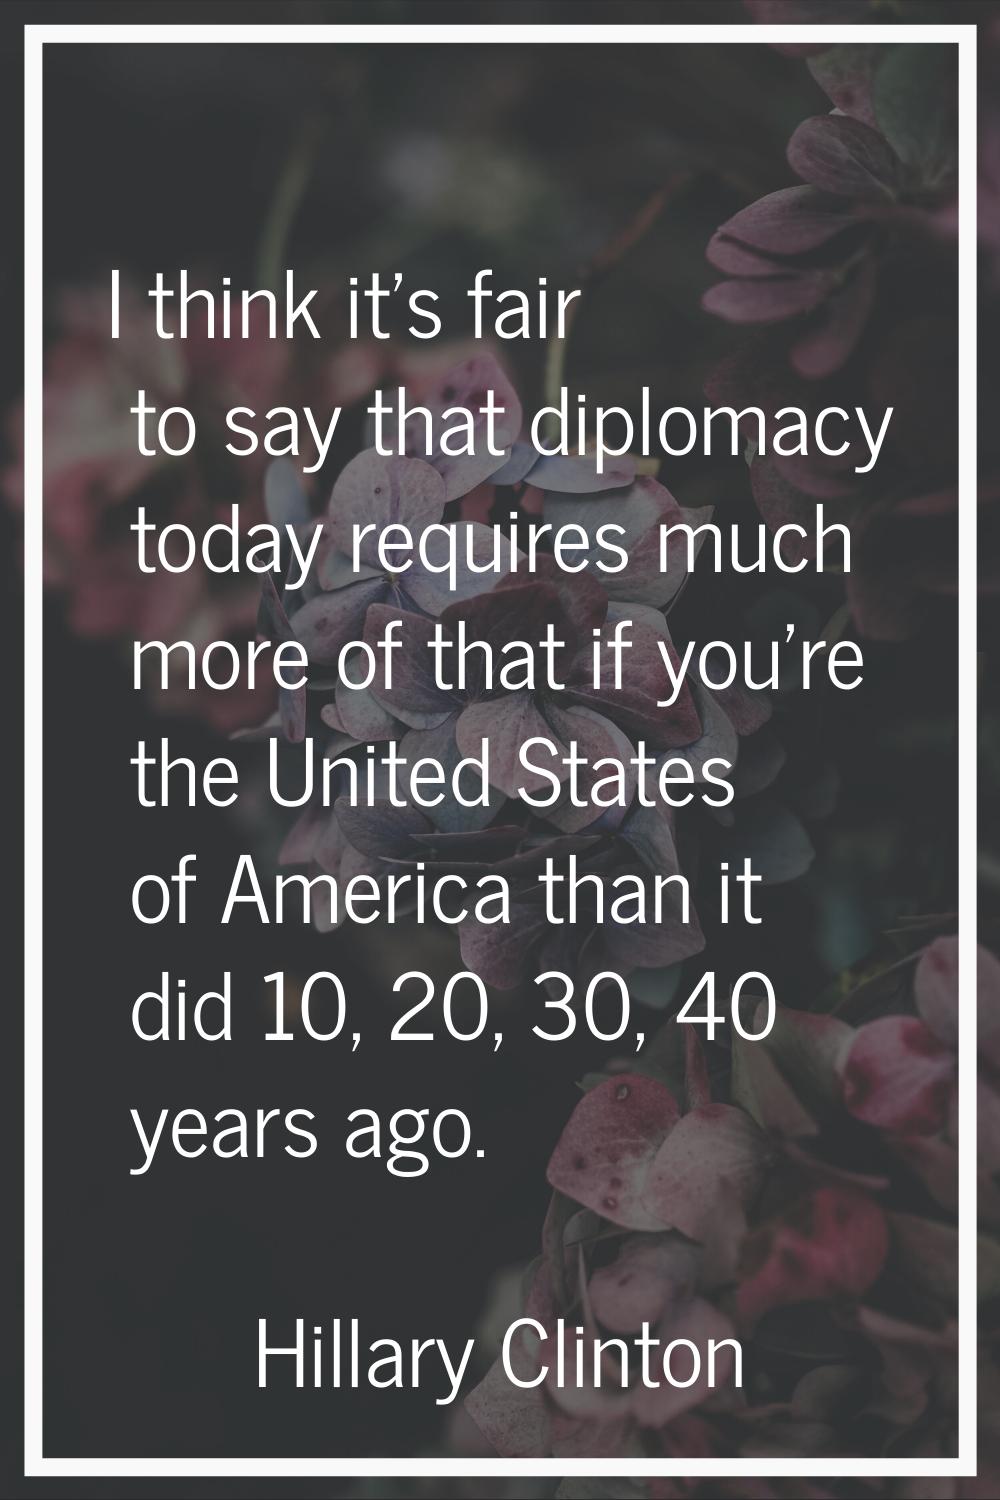 I think it's fair to say that diplomacy today requires much more of that if you're the United State